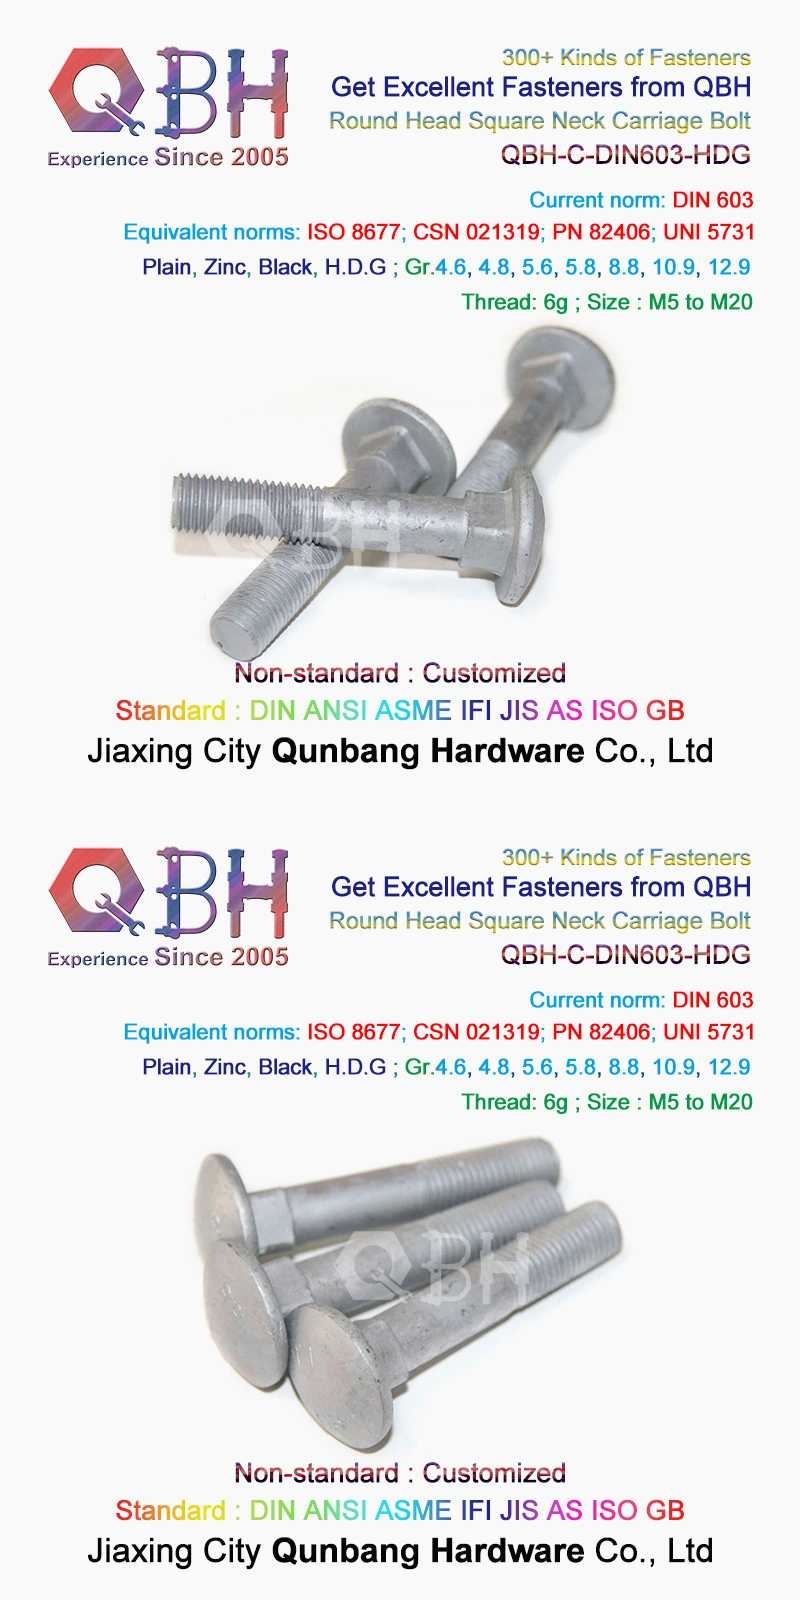 Qbh Carriage Bolts DIN603 Cl. 4.8/6.8 M5-M20